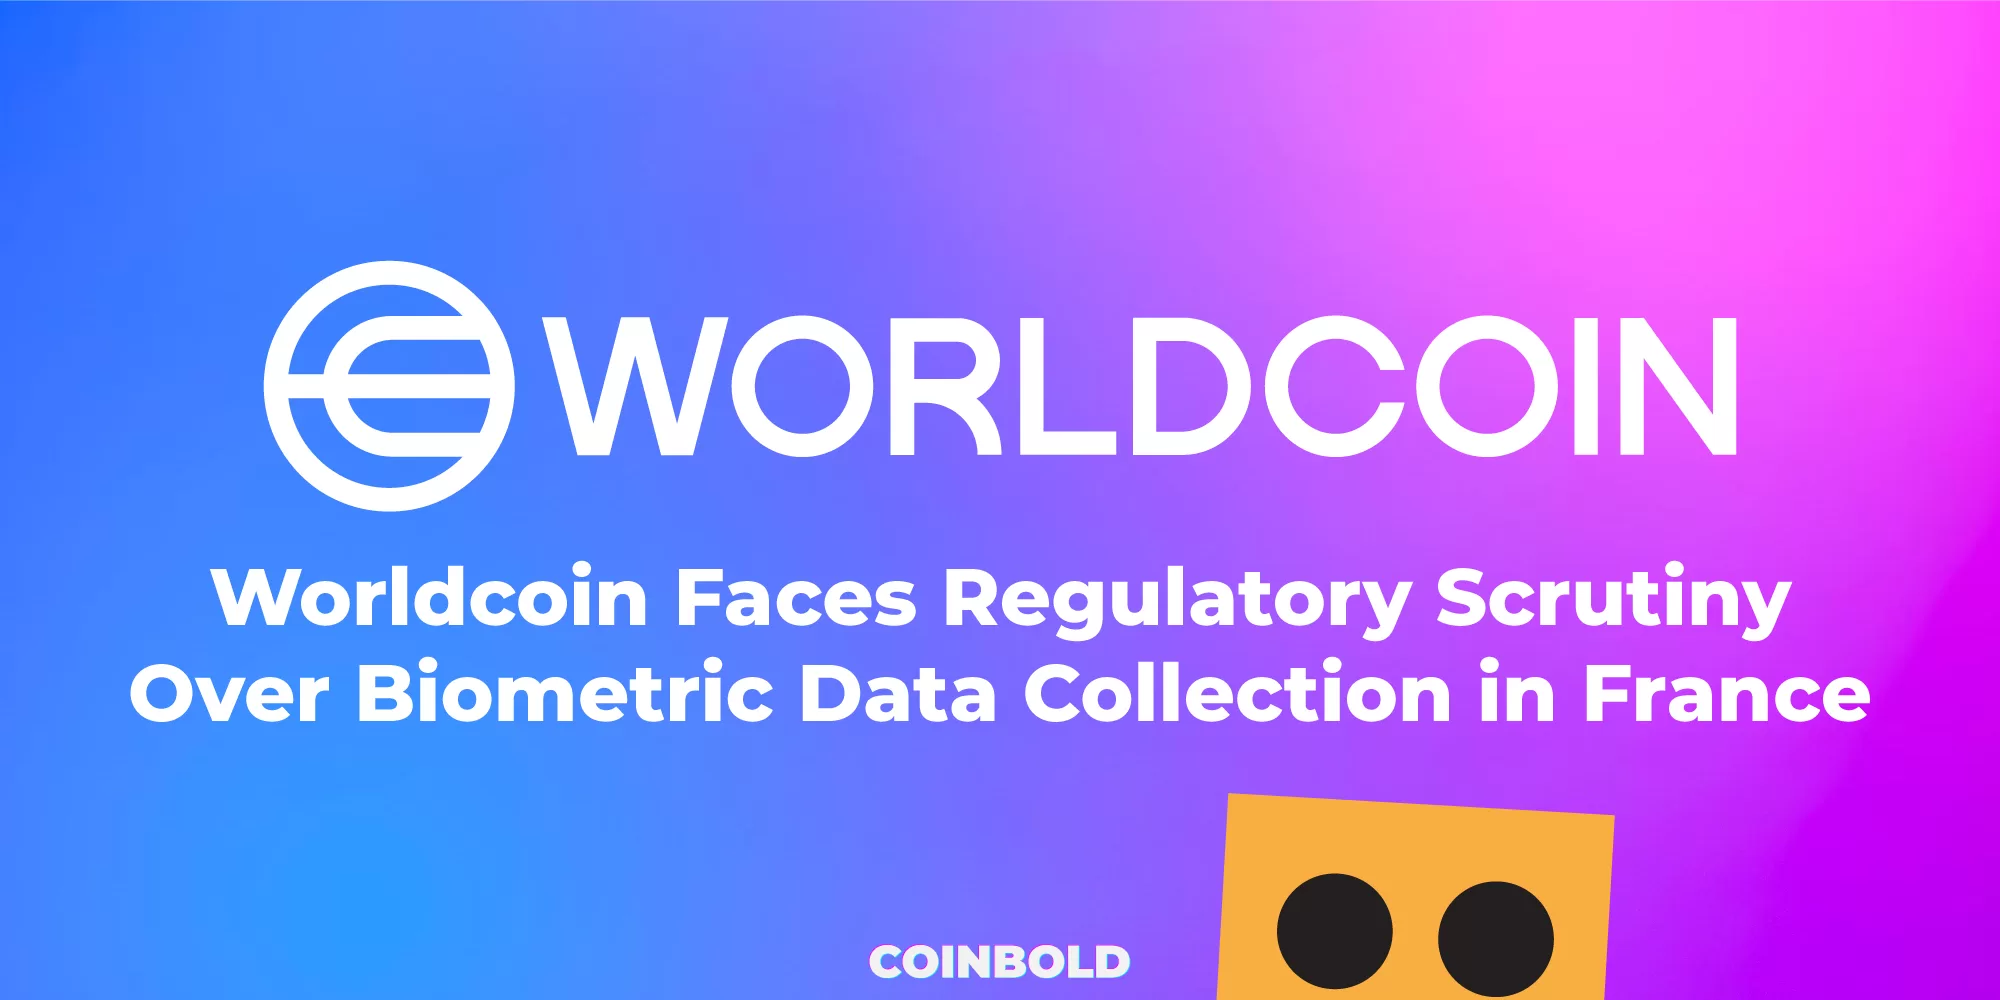 Worldcoin Faces Regulatory Scrutiny Over Biometric Data Collection in France